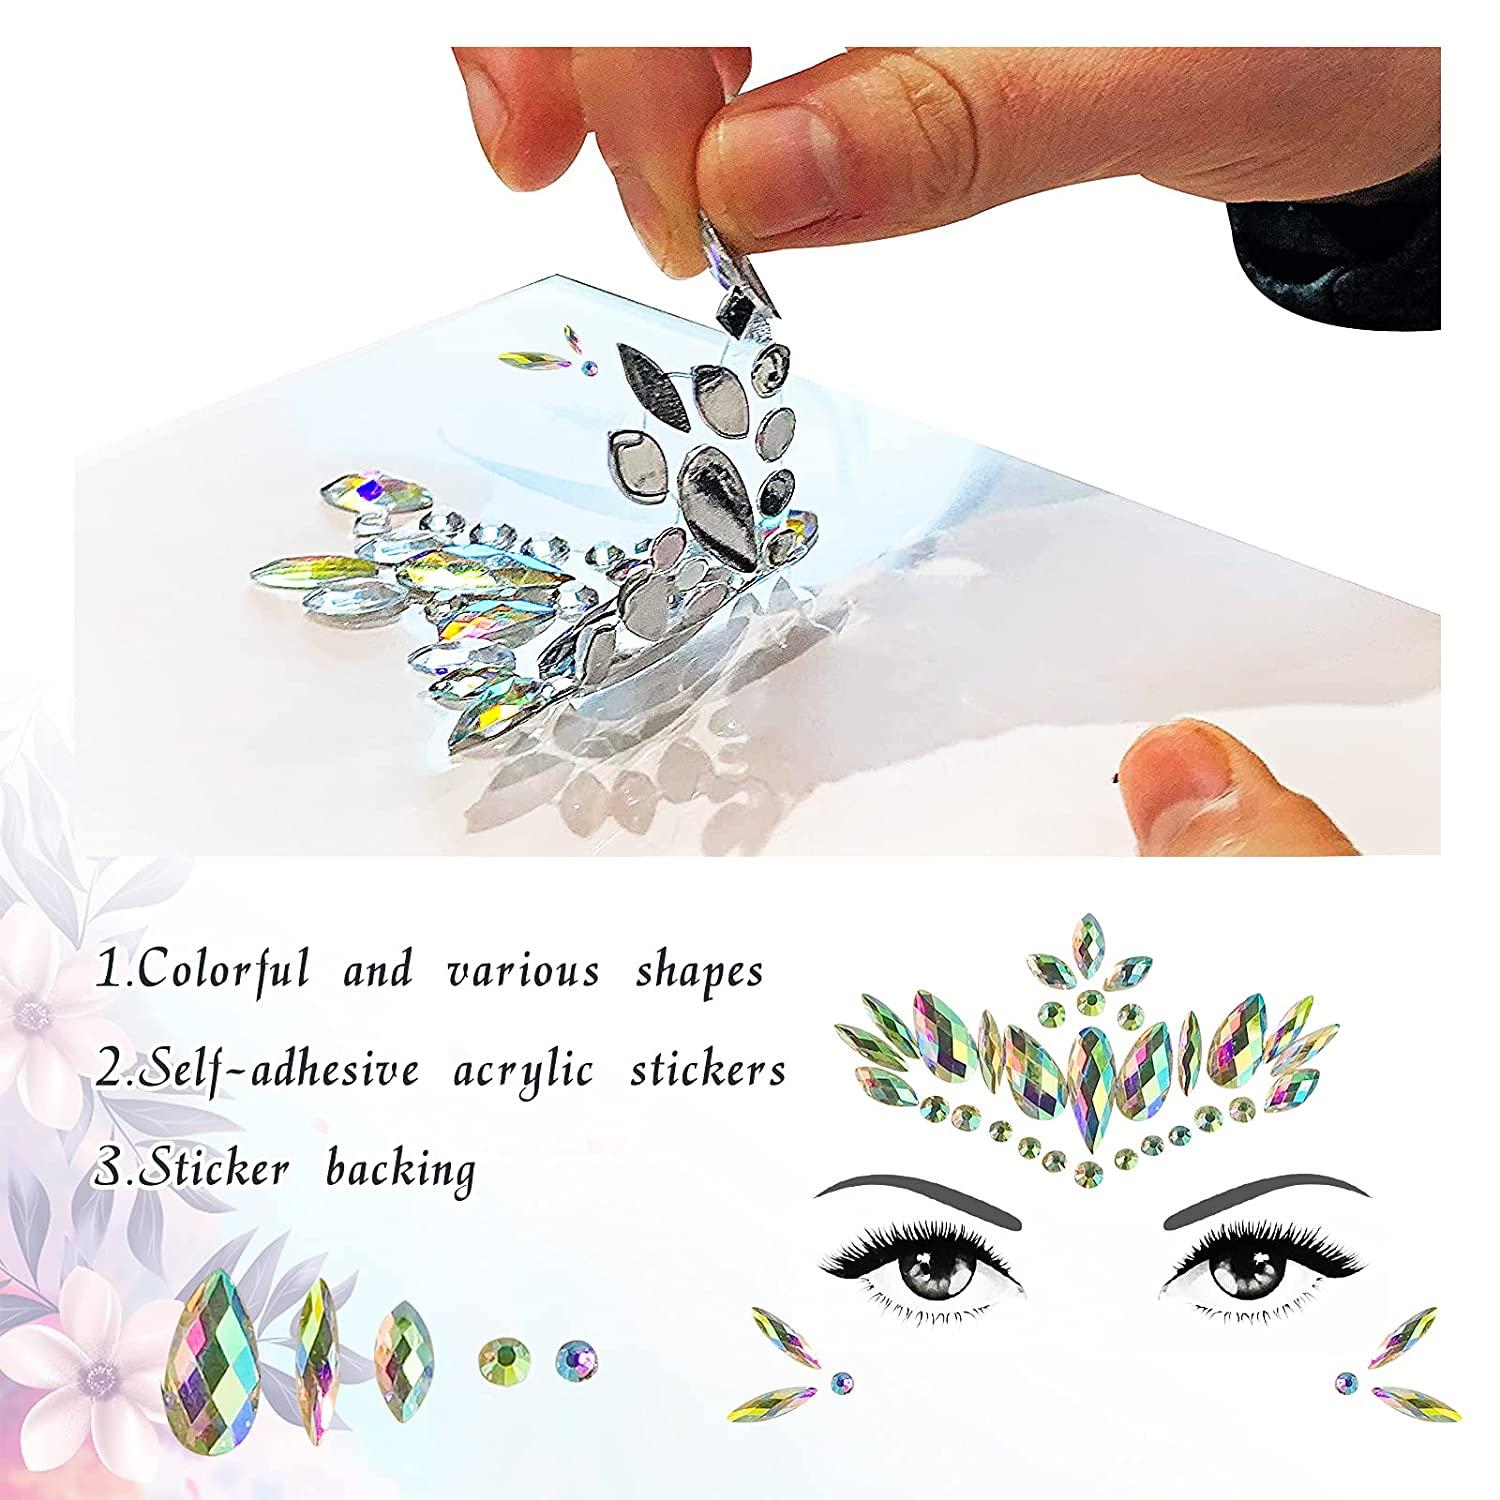 3 Sets of Self-adhesive Face Gems Stickers Decorative Eye Gems